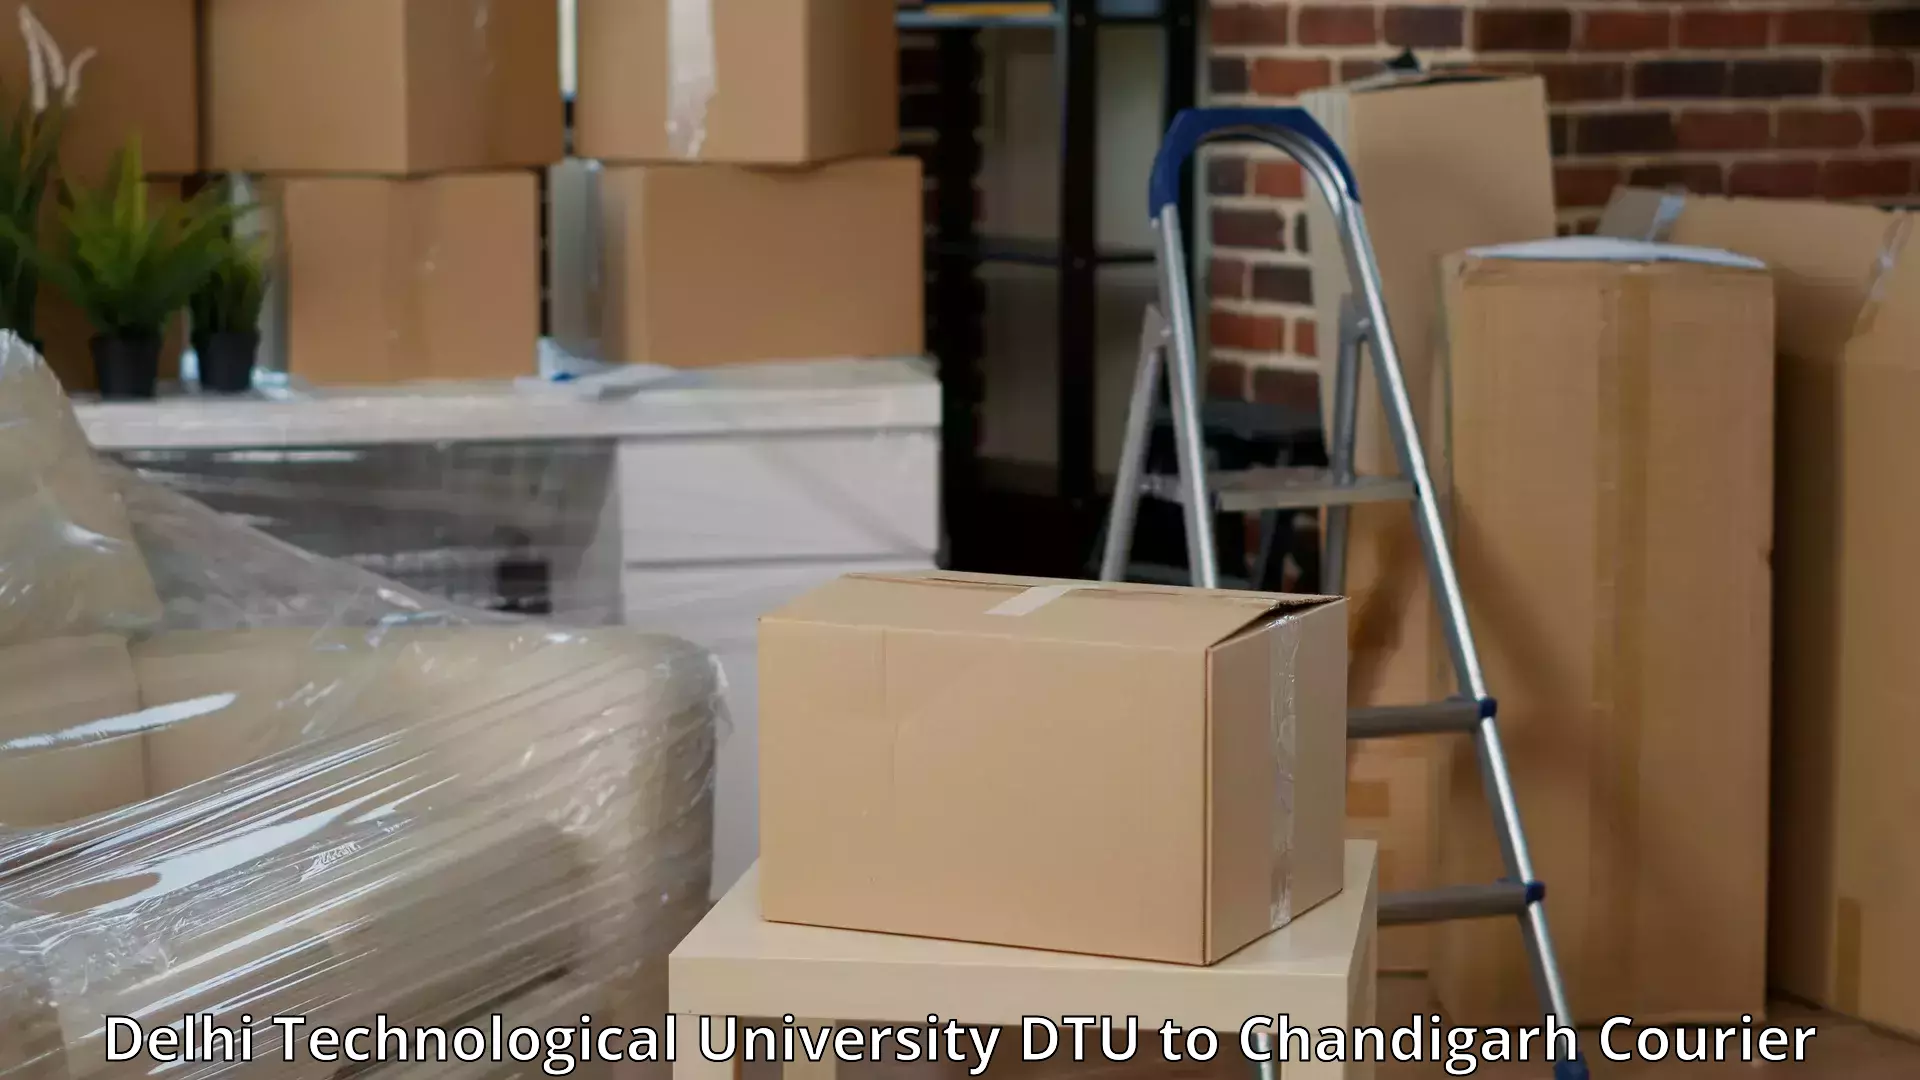 Home moving specialists Delhi Technological University DTU to Panjab University Chandigarh